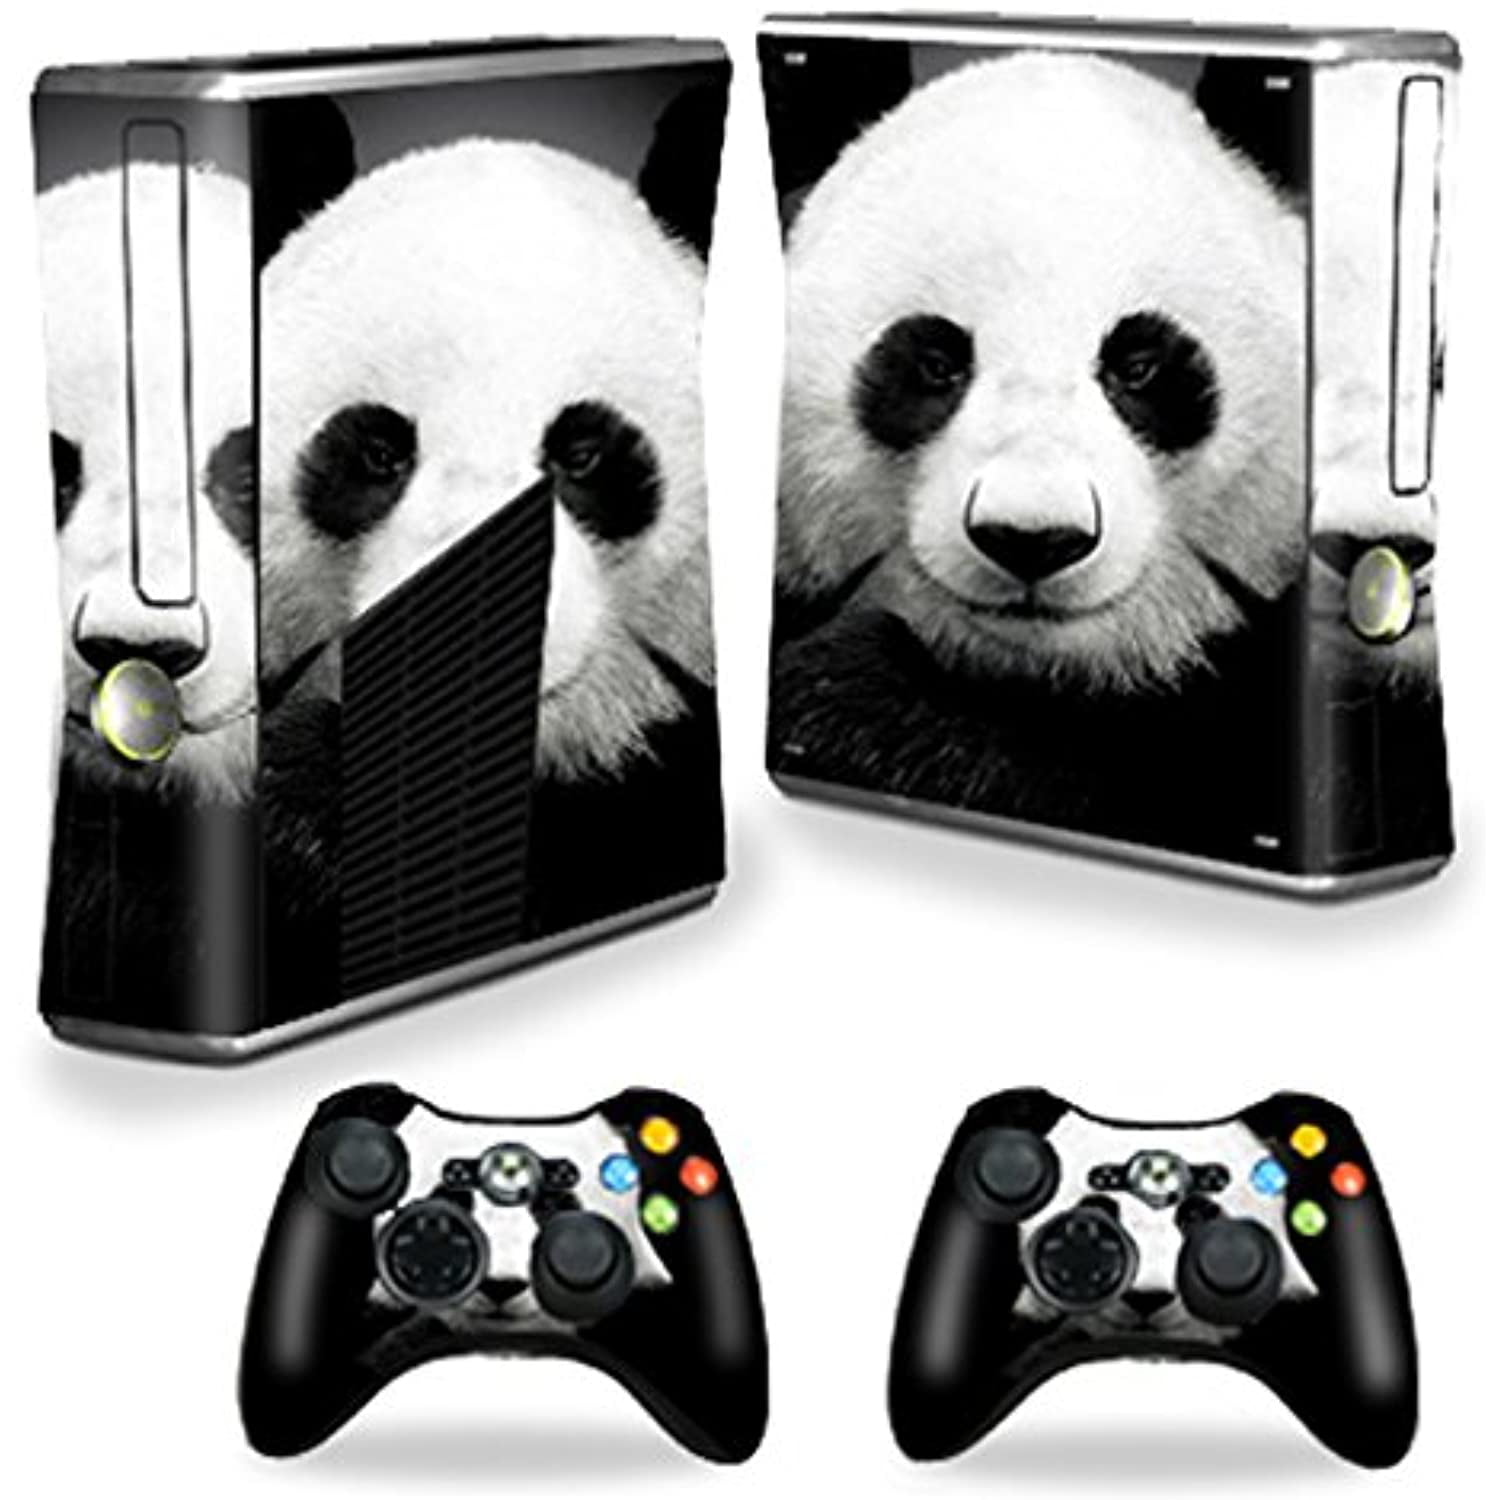 Protective and Unique Vinyl Decal wrap Cover Remove Made in The USA Wood and Marble Easy to Apply Durable MightySkins Skin Compatible with Xbox 360 S Console and Change Styles 